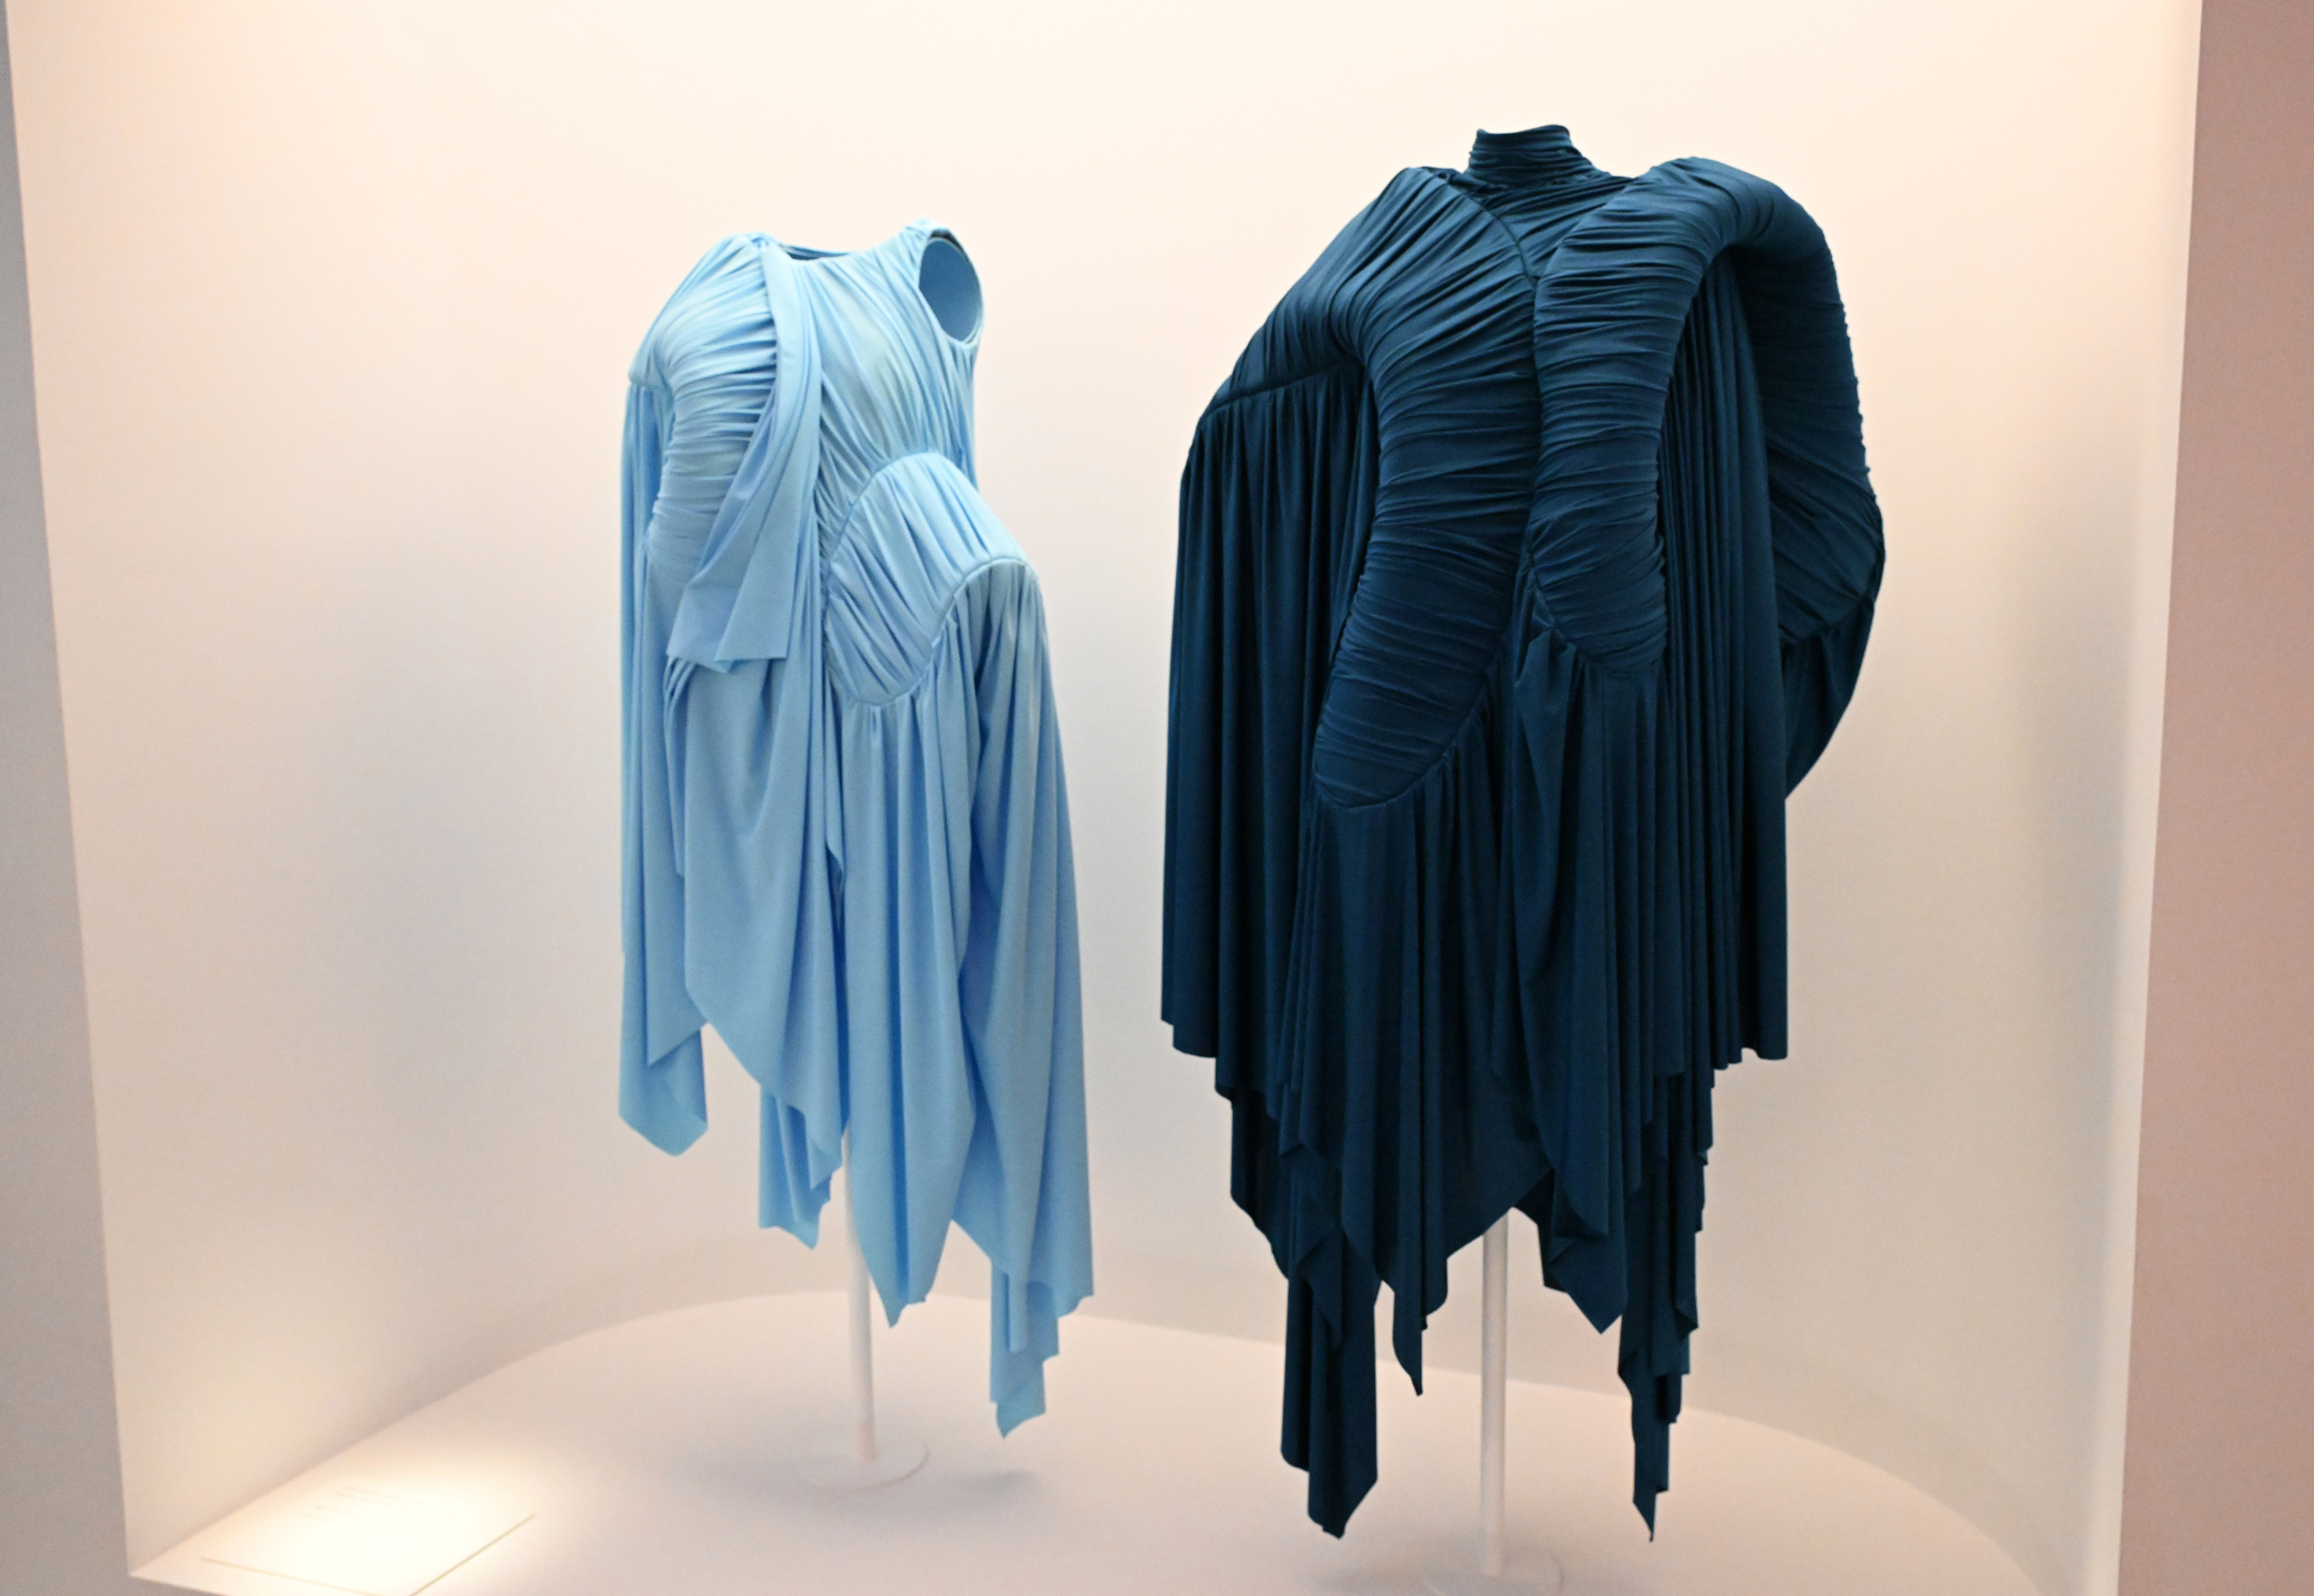 Two pleated dresses on display, one light blue and one dark blue, with unique asymmetrical designs